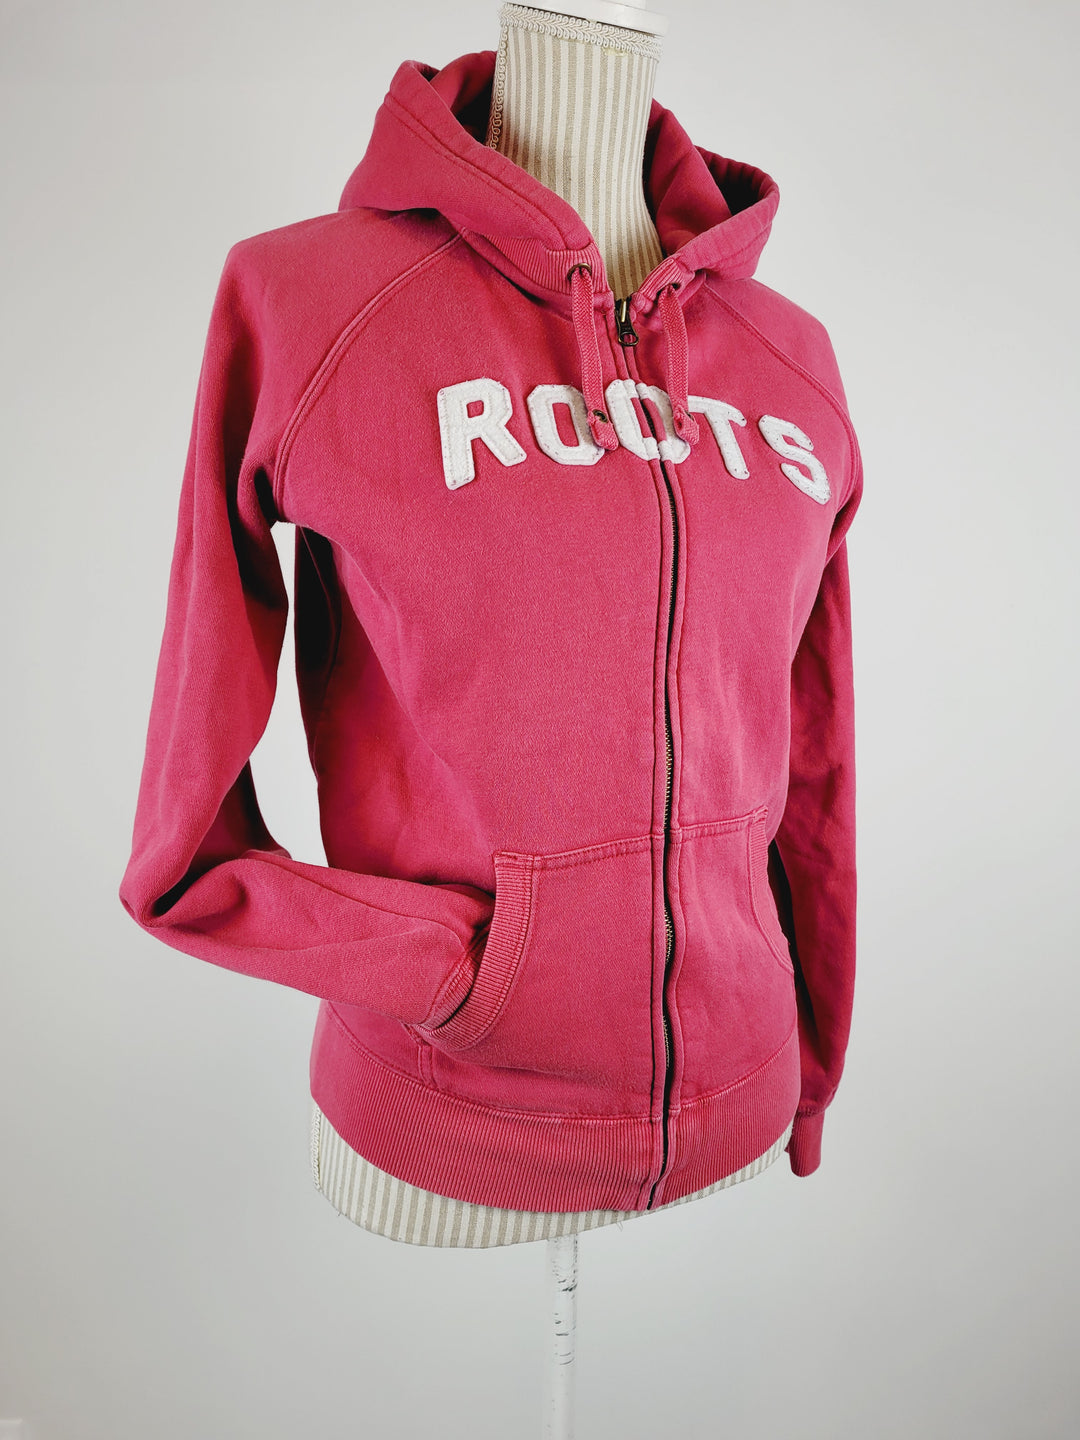 ROOTS PINK SWEATER LADIES SMALL VGUC